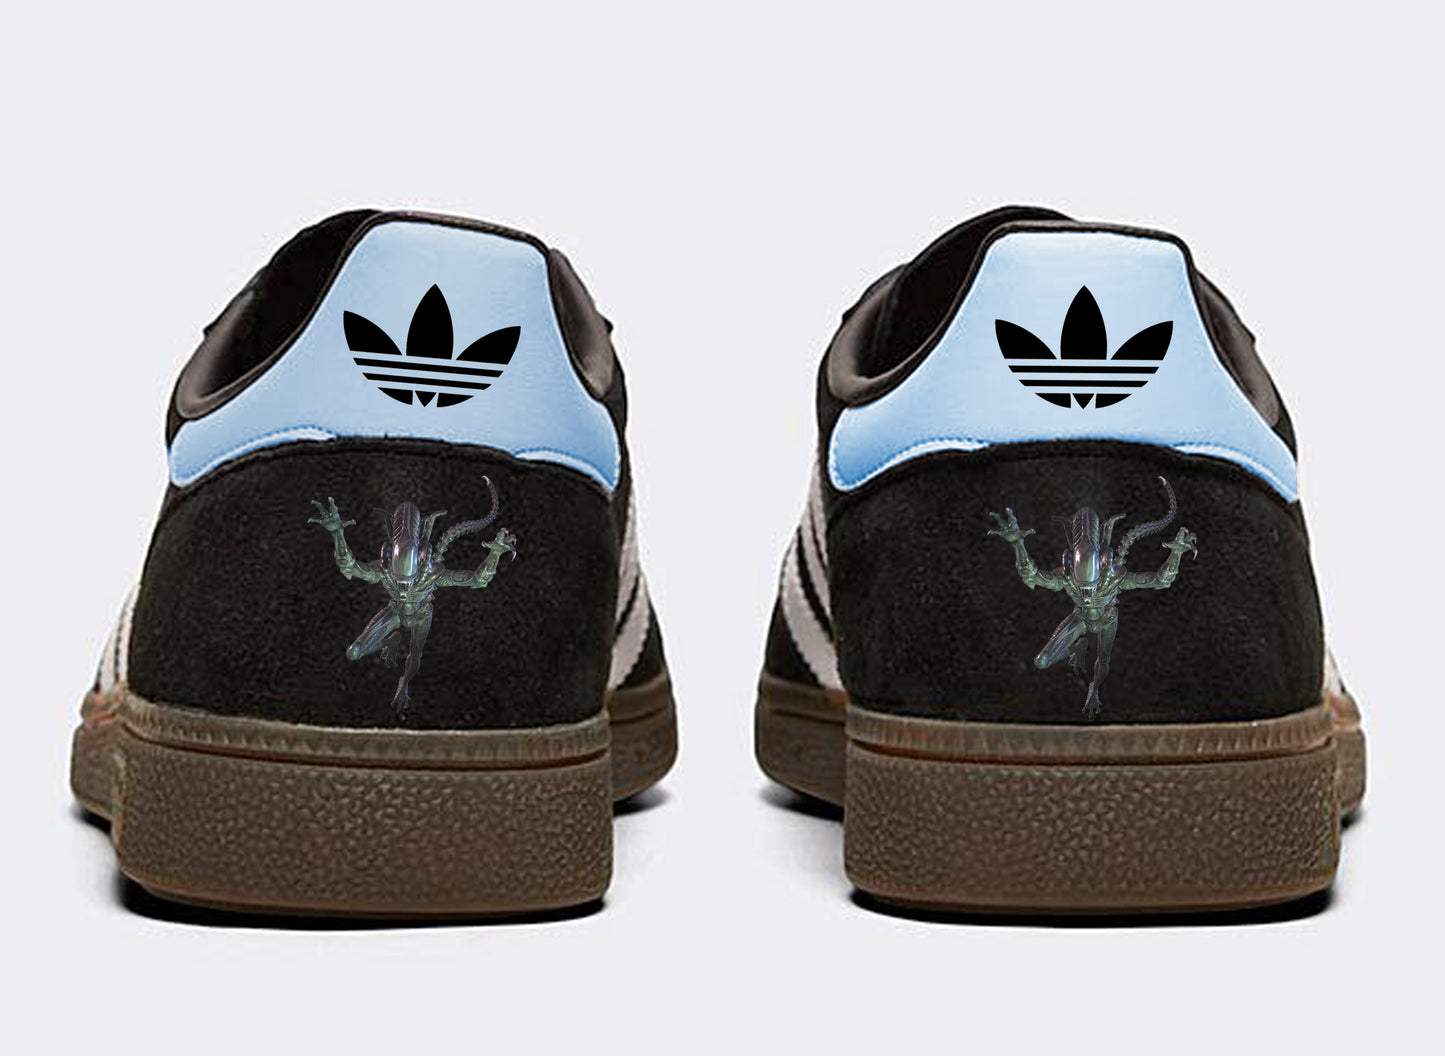 Limited edition Ridley Scotts Aliens inspired black / light blue Adidas Handball Spezial trainers / sneakers